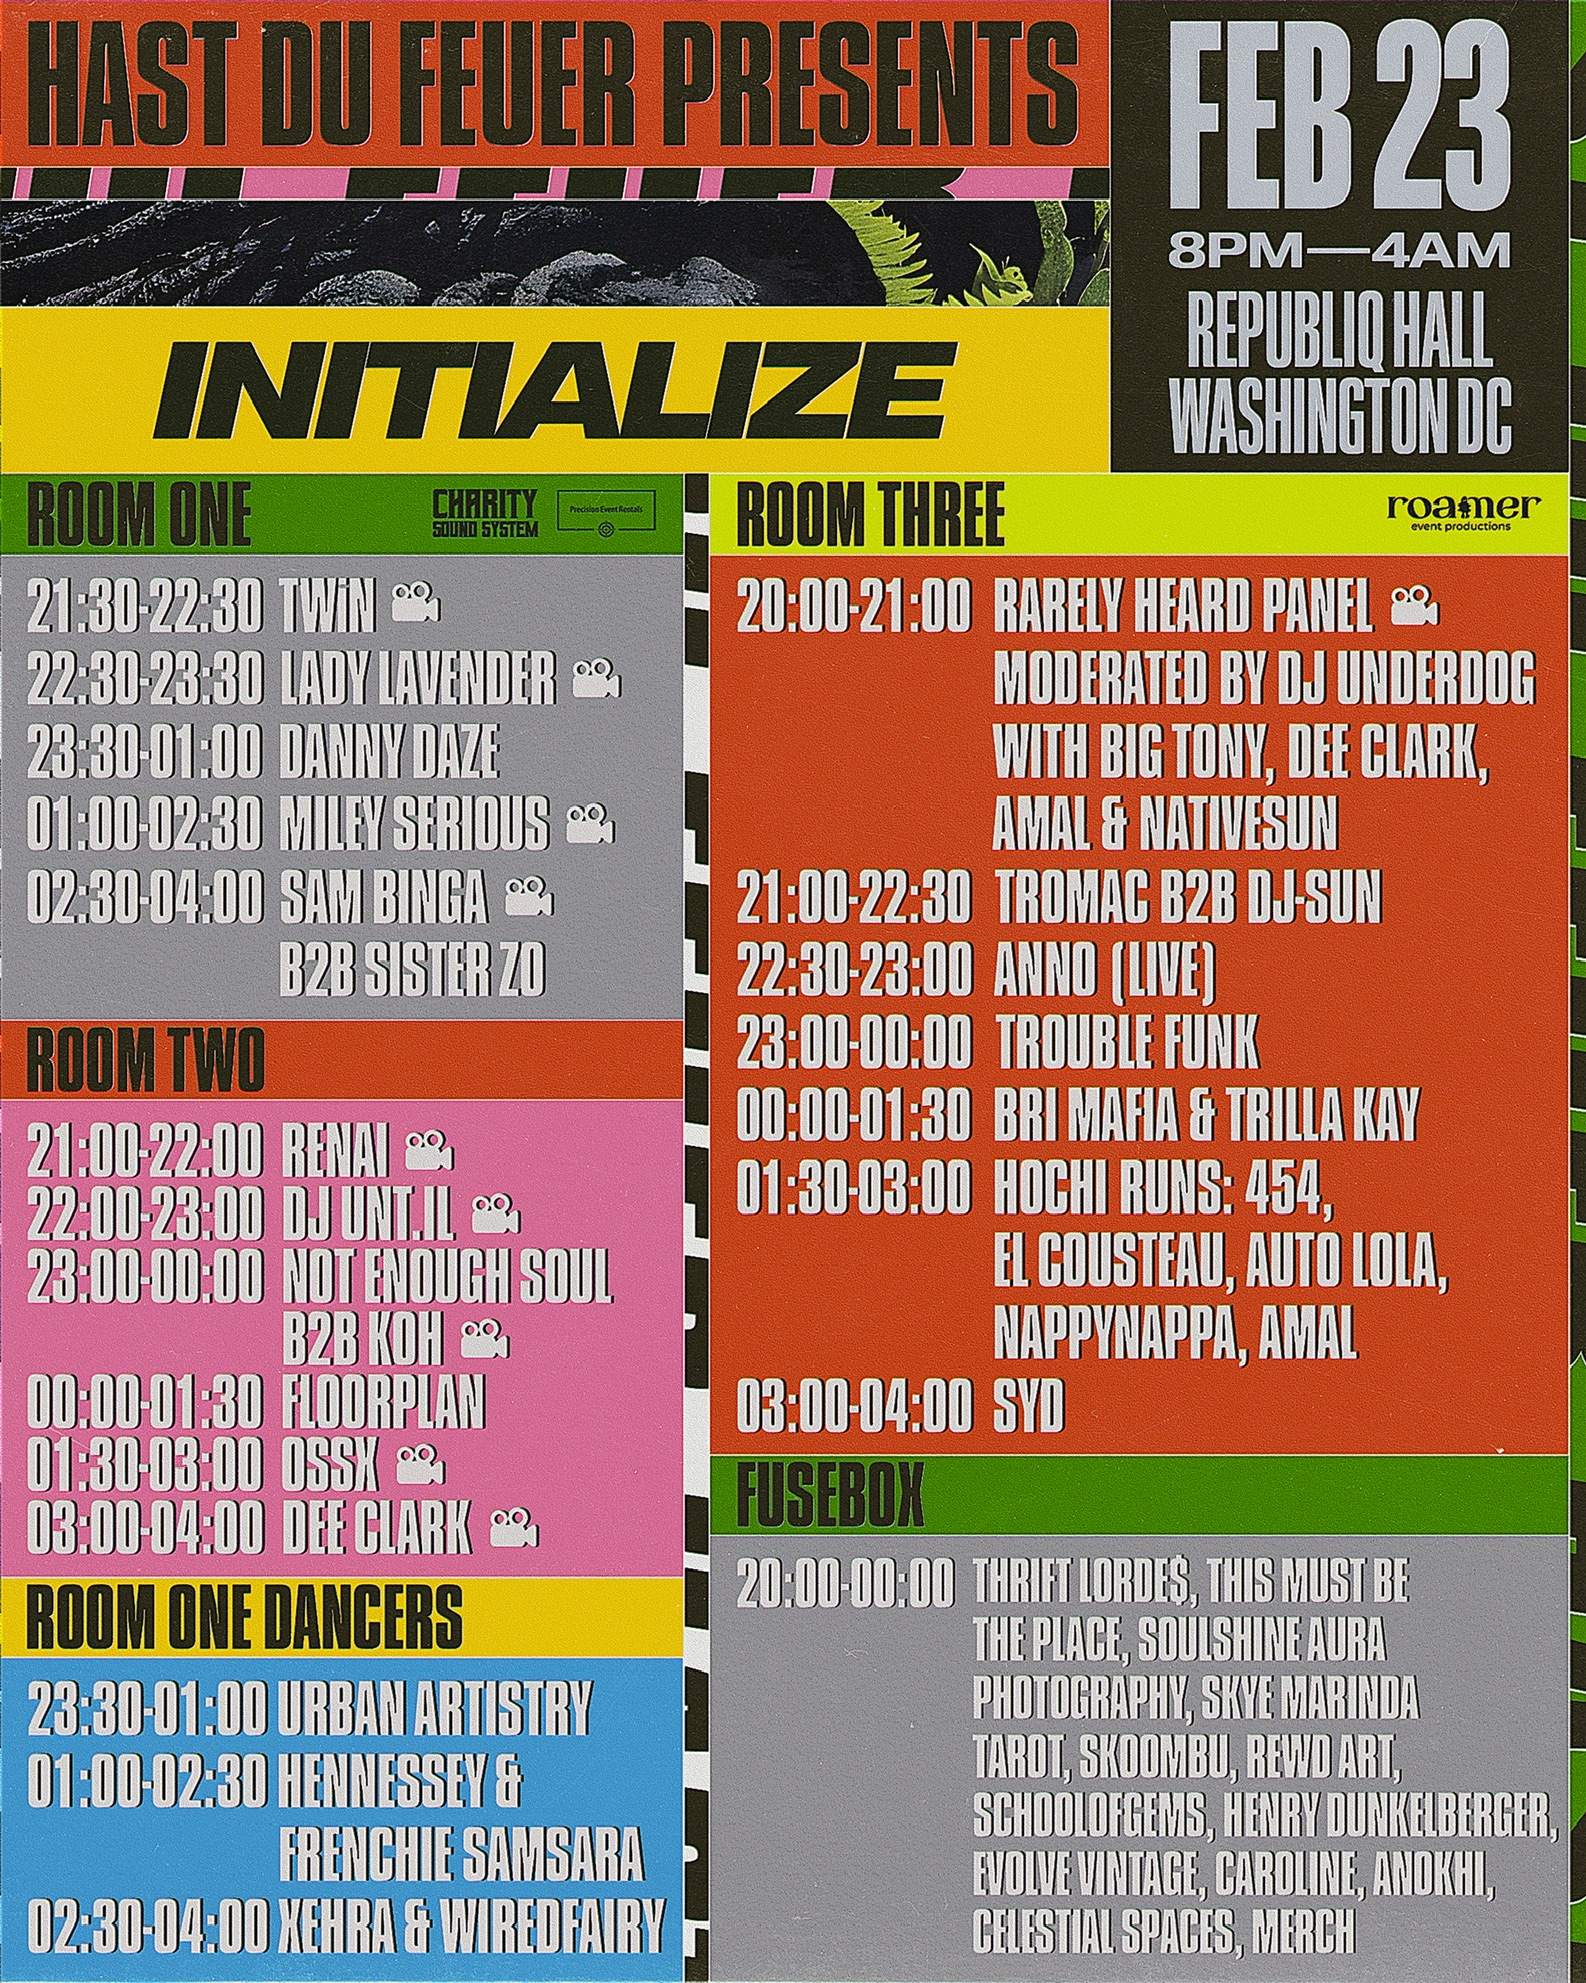 Hast du Feuer presents INITIALIZE: Floorplan, Trouble Funk & 30 more acts - Página trasera